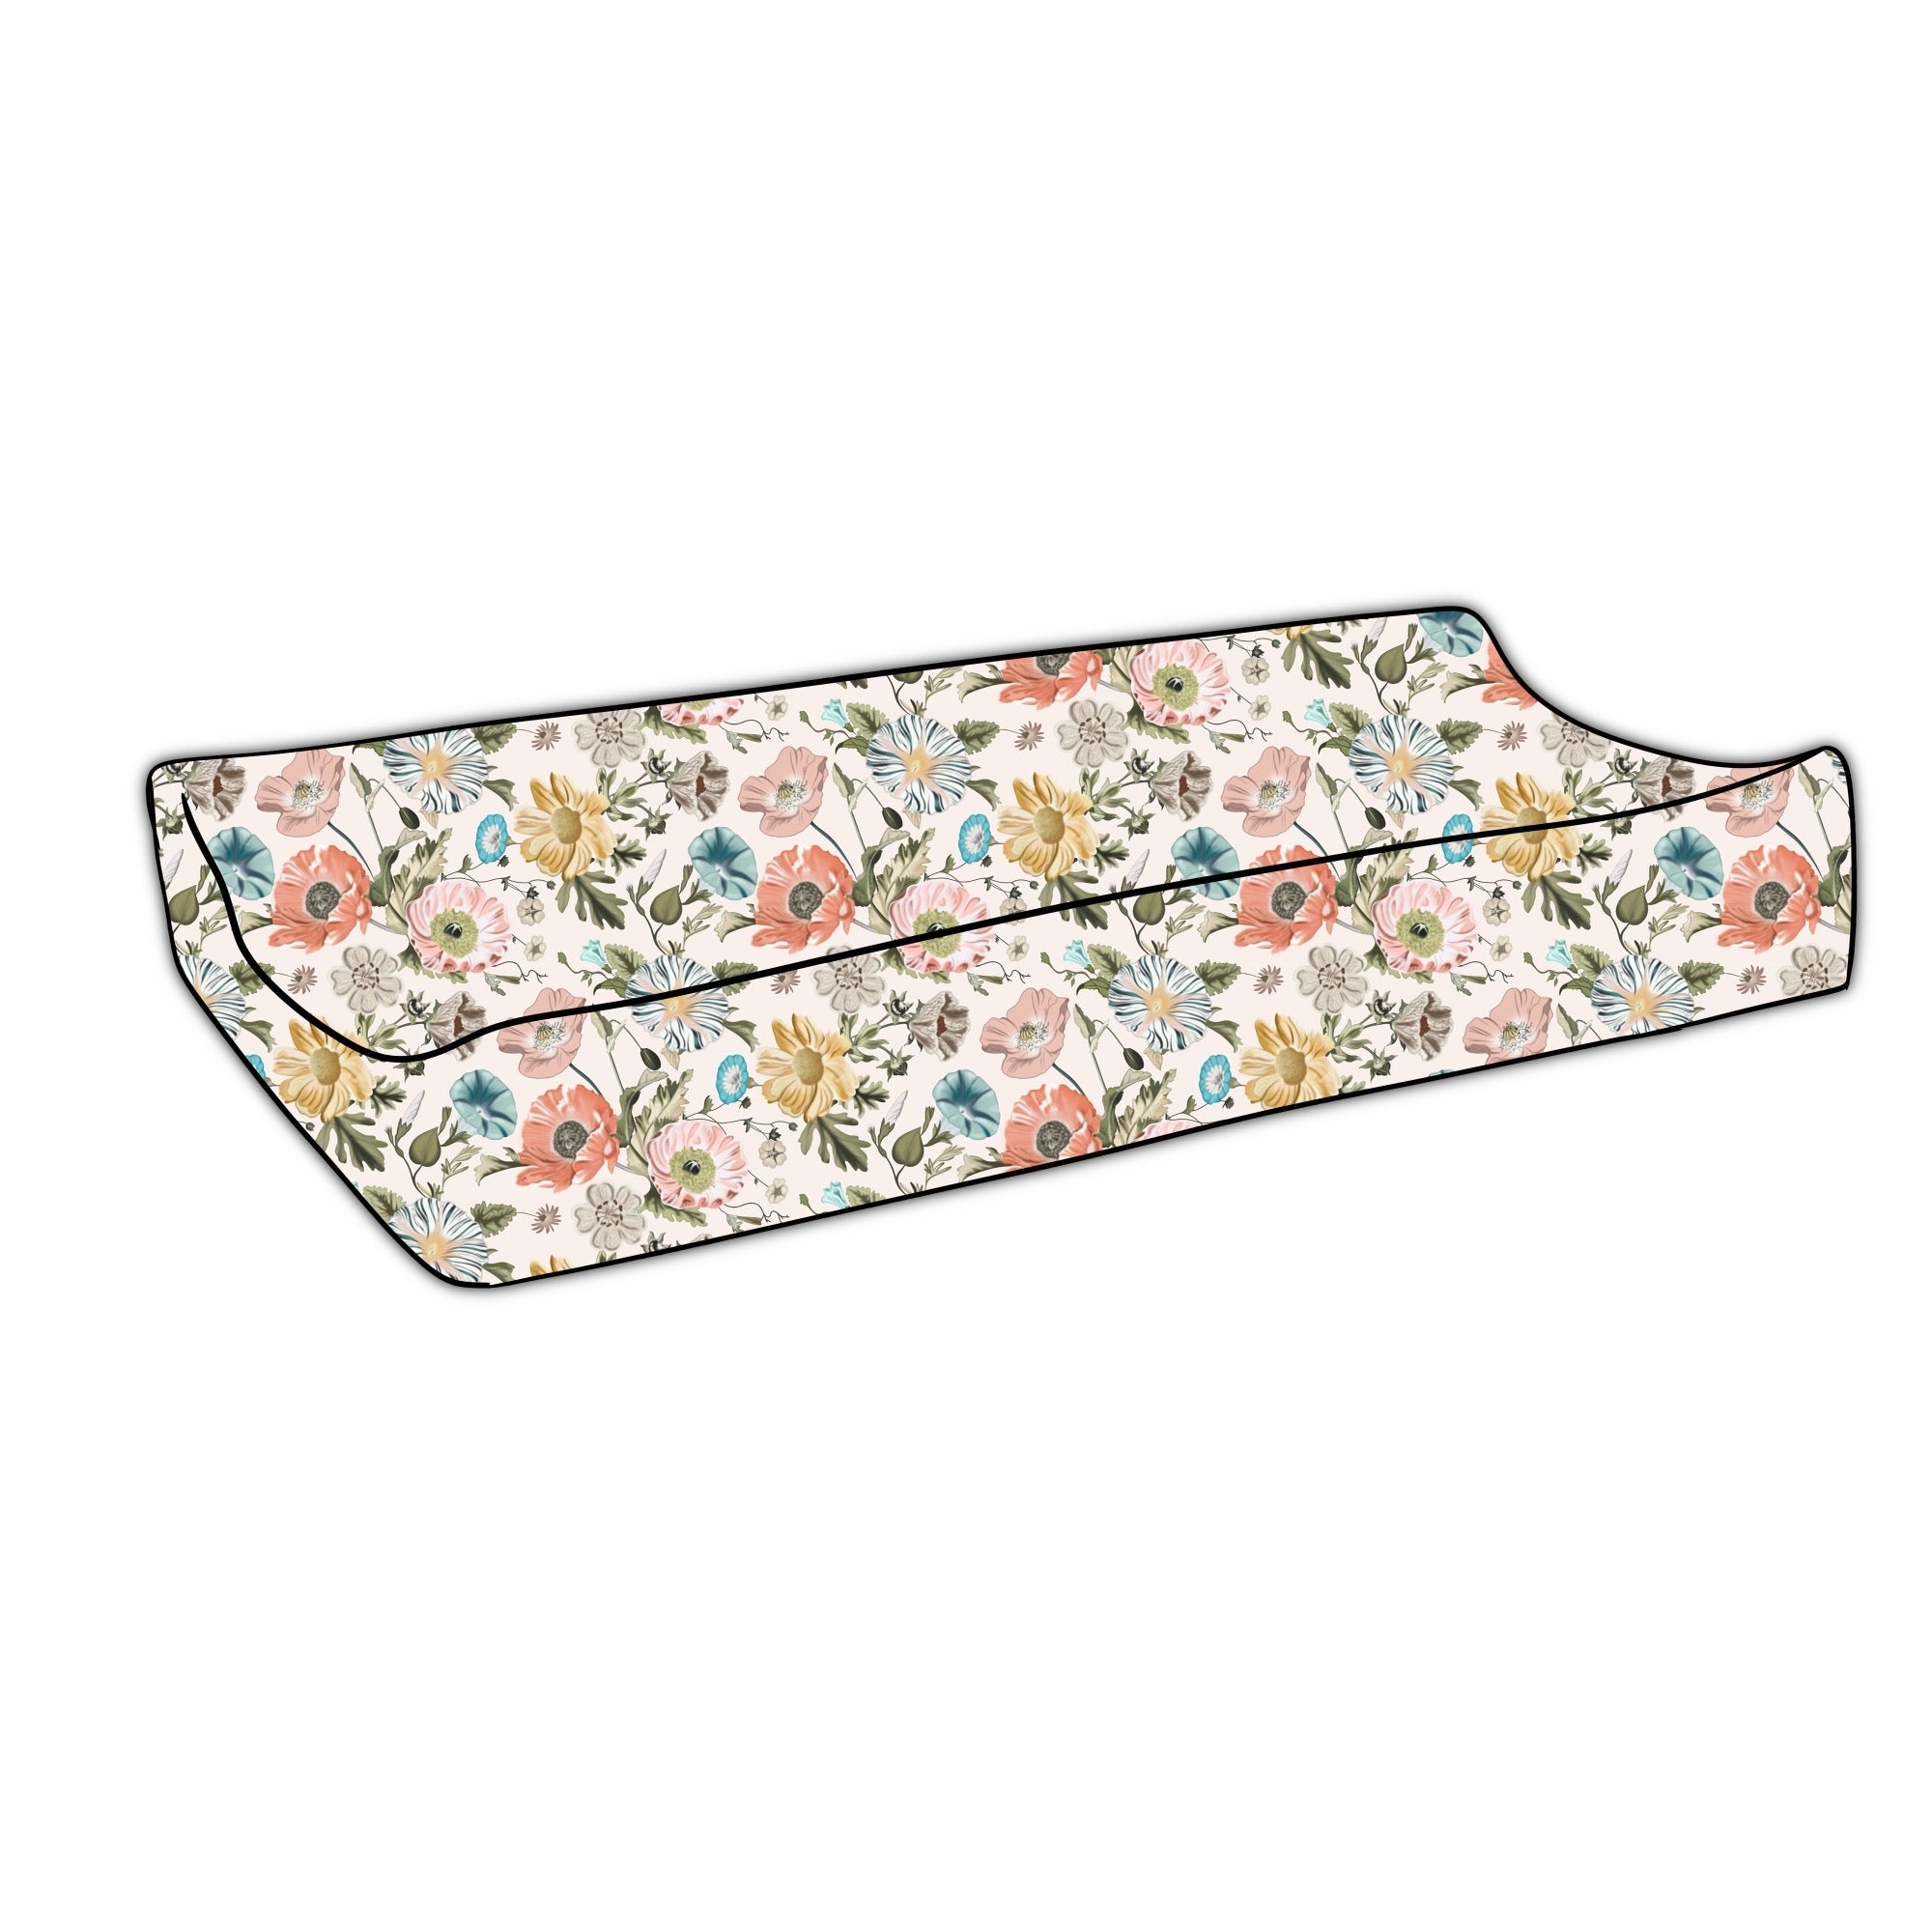 BAMBOO Lydia’s Blooms CHANGING PAD COVER